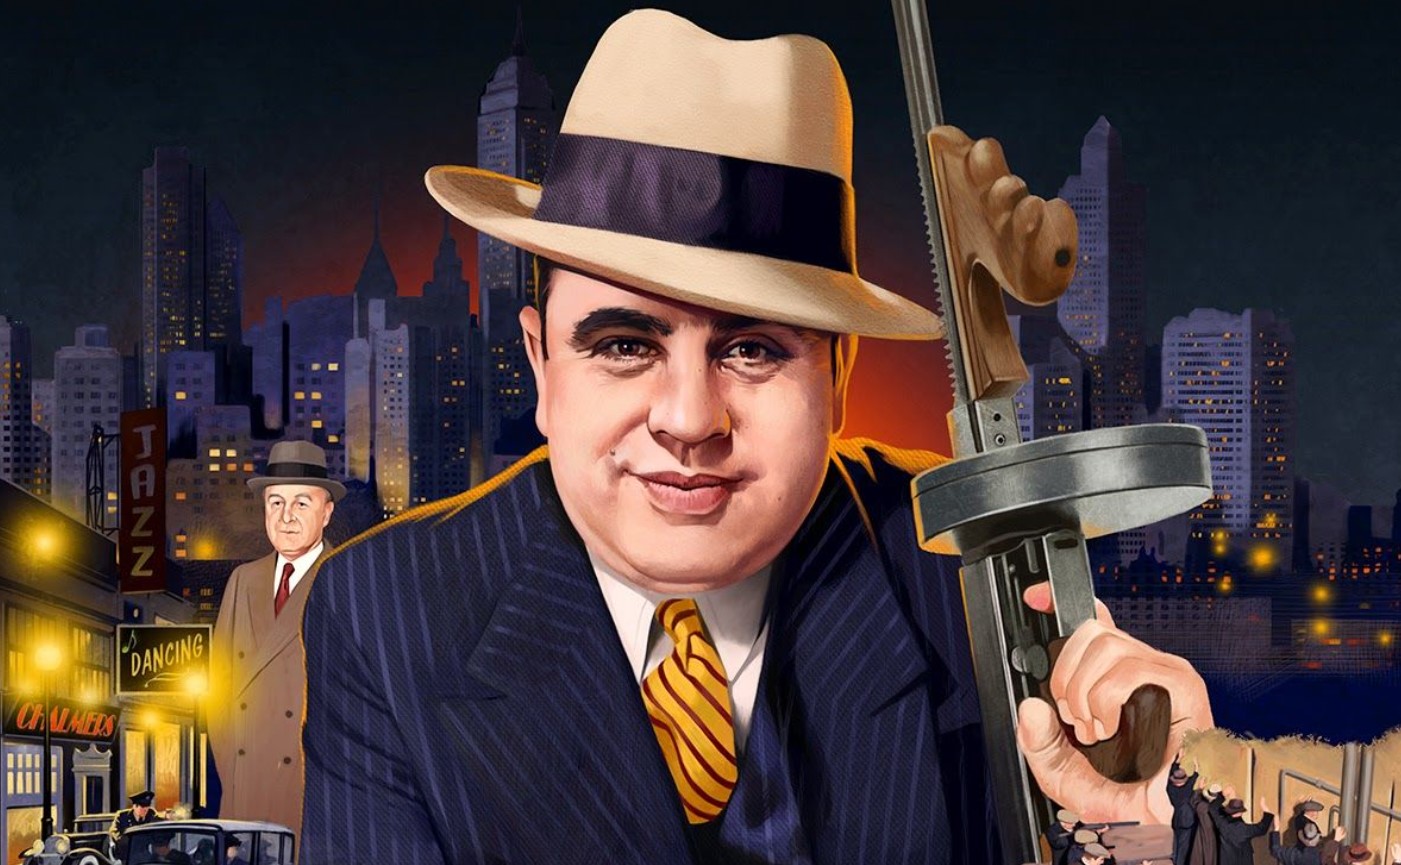 Al Capone Uncovered - The Lasting Impact on Society and Culture